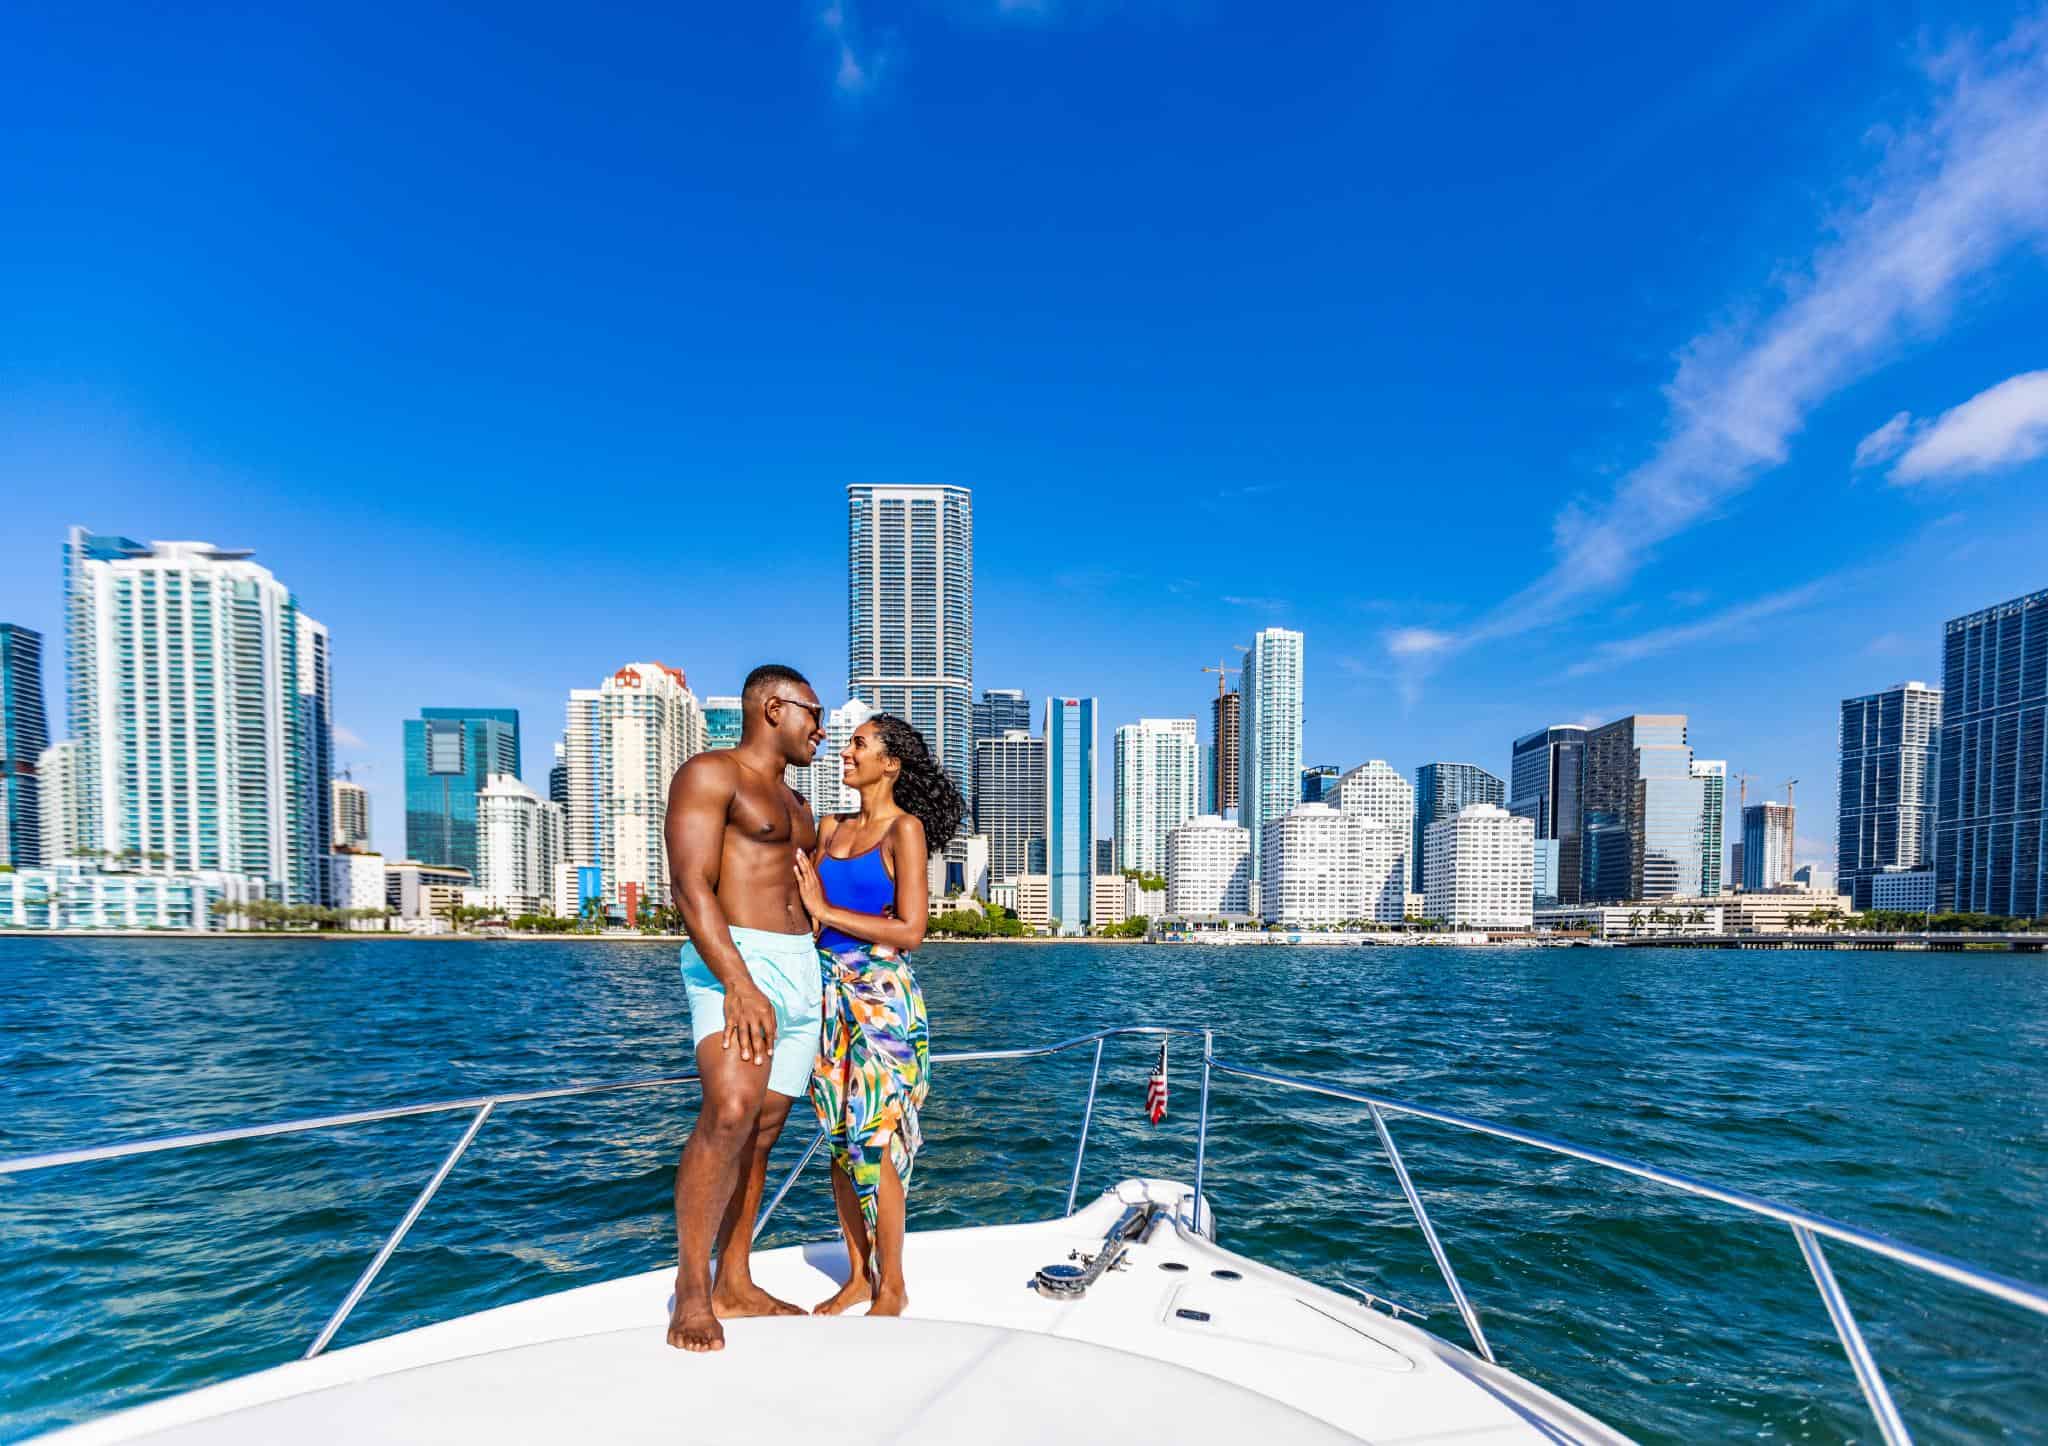 <p>While many have moved to Miami, it has become too much for some. It’s loud, traffic and the cost of living has skyrocketed. Add into the mix the state’s conservative politics, and it’s become all too much for some.</p>